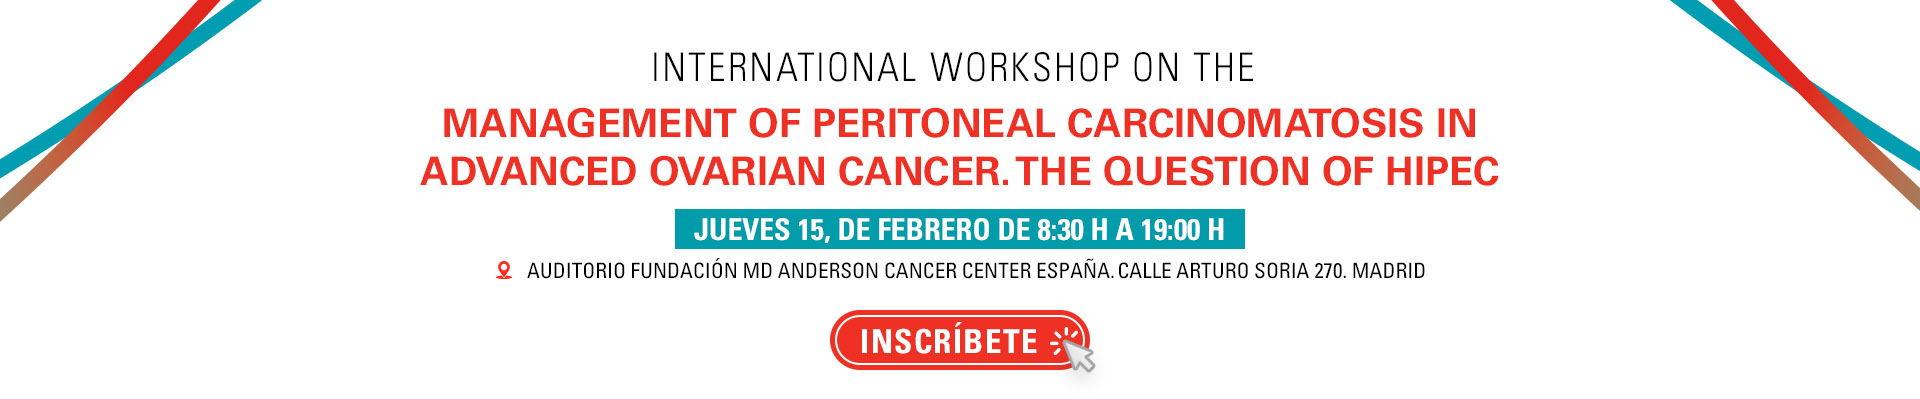 International workshop on the management of peritoneal carcinomatosis in advanced ovarian cancer